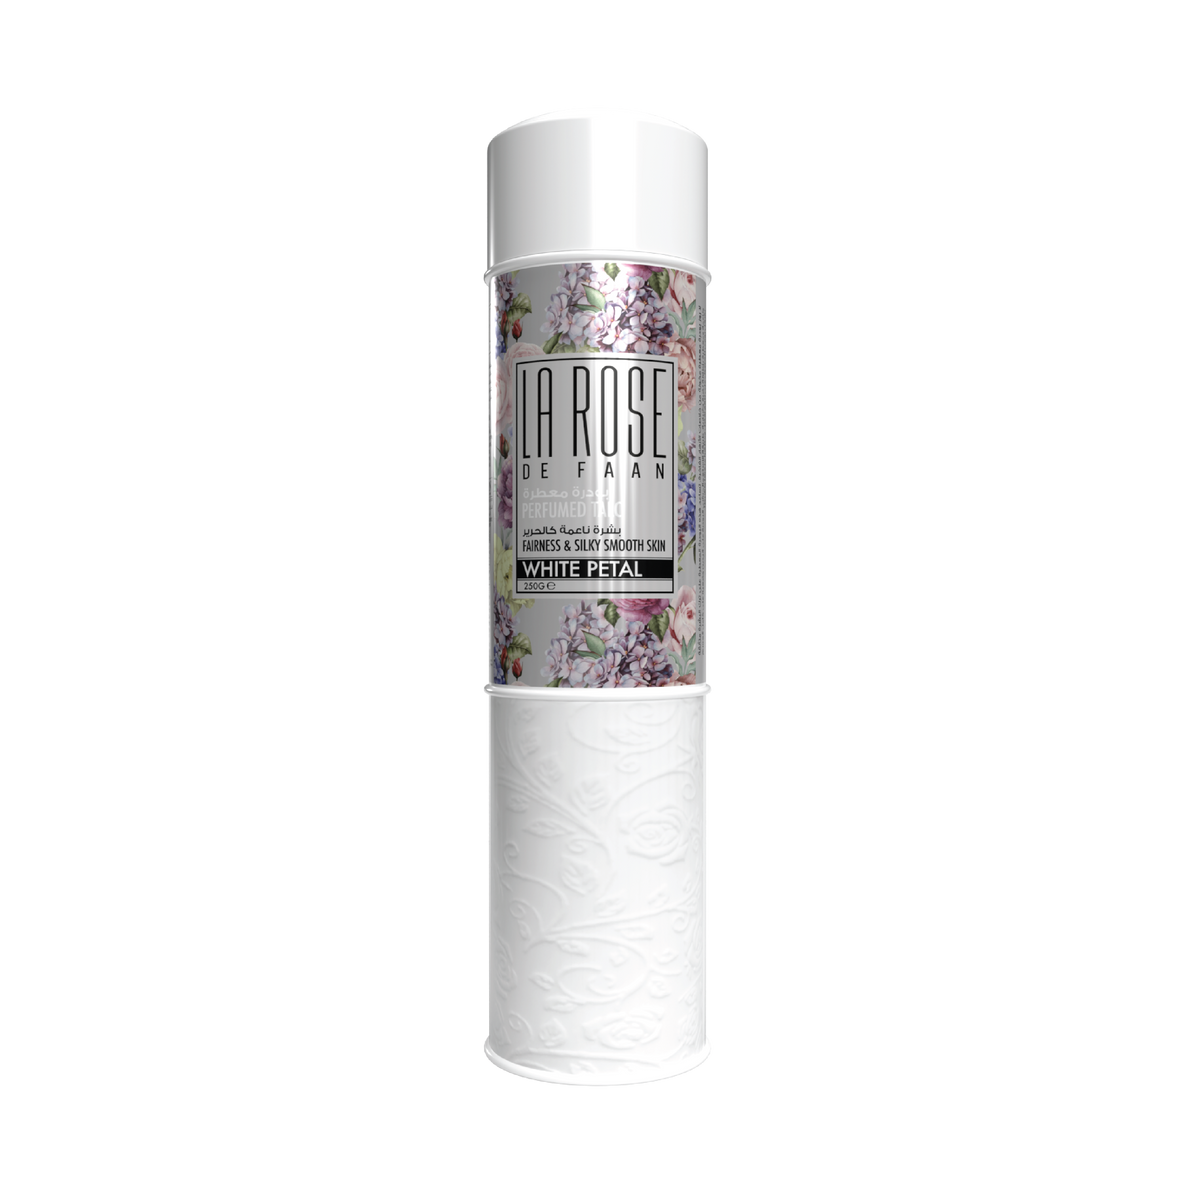 Immerse Yourself in Elegance with LA ROSE's Perfumed Talc White Petal